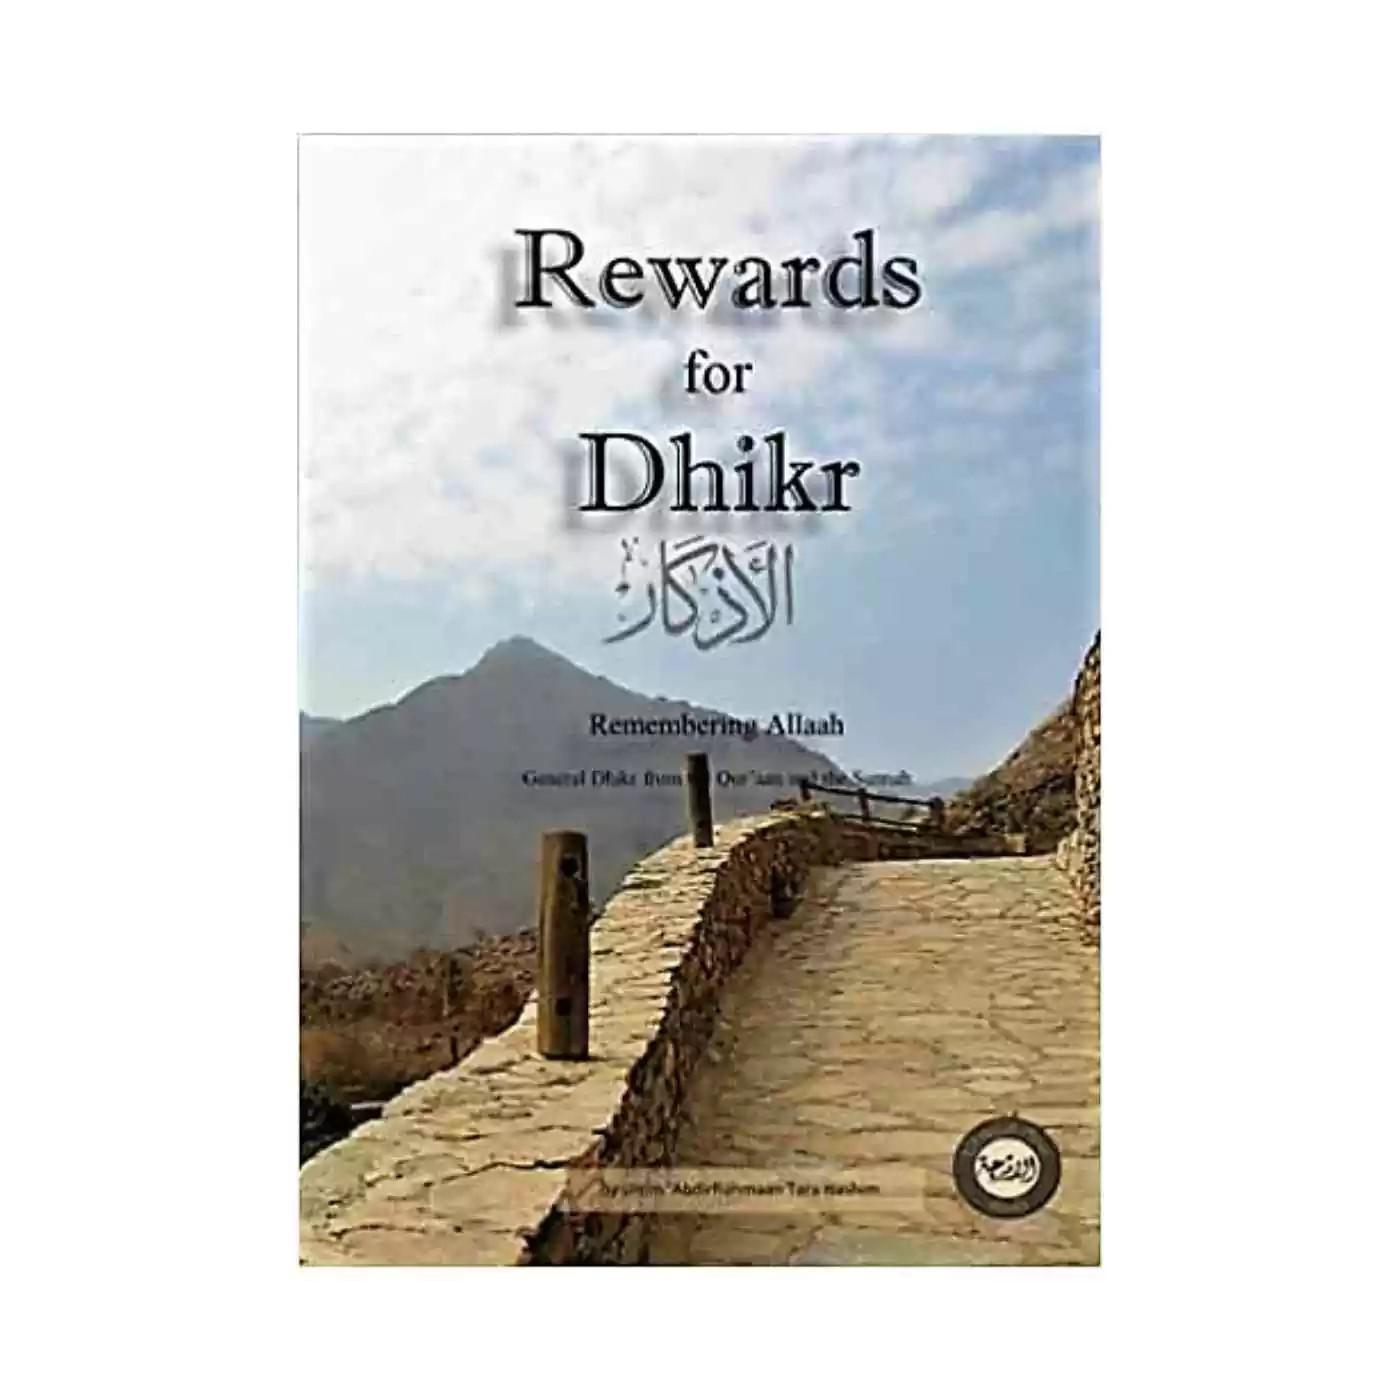 Rewards For Dhikr - Remembering Allaah